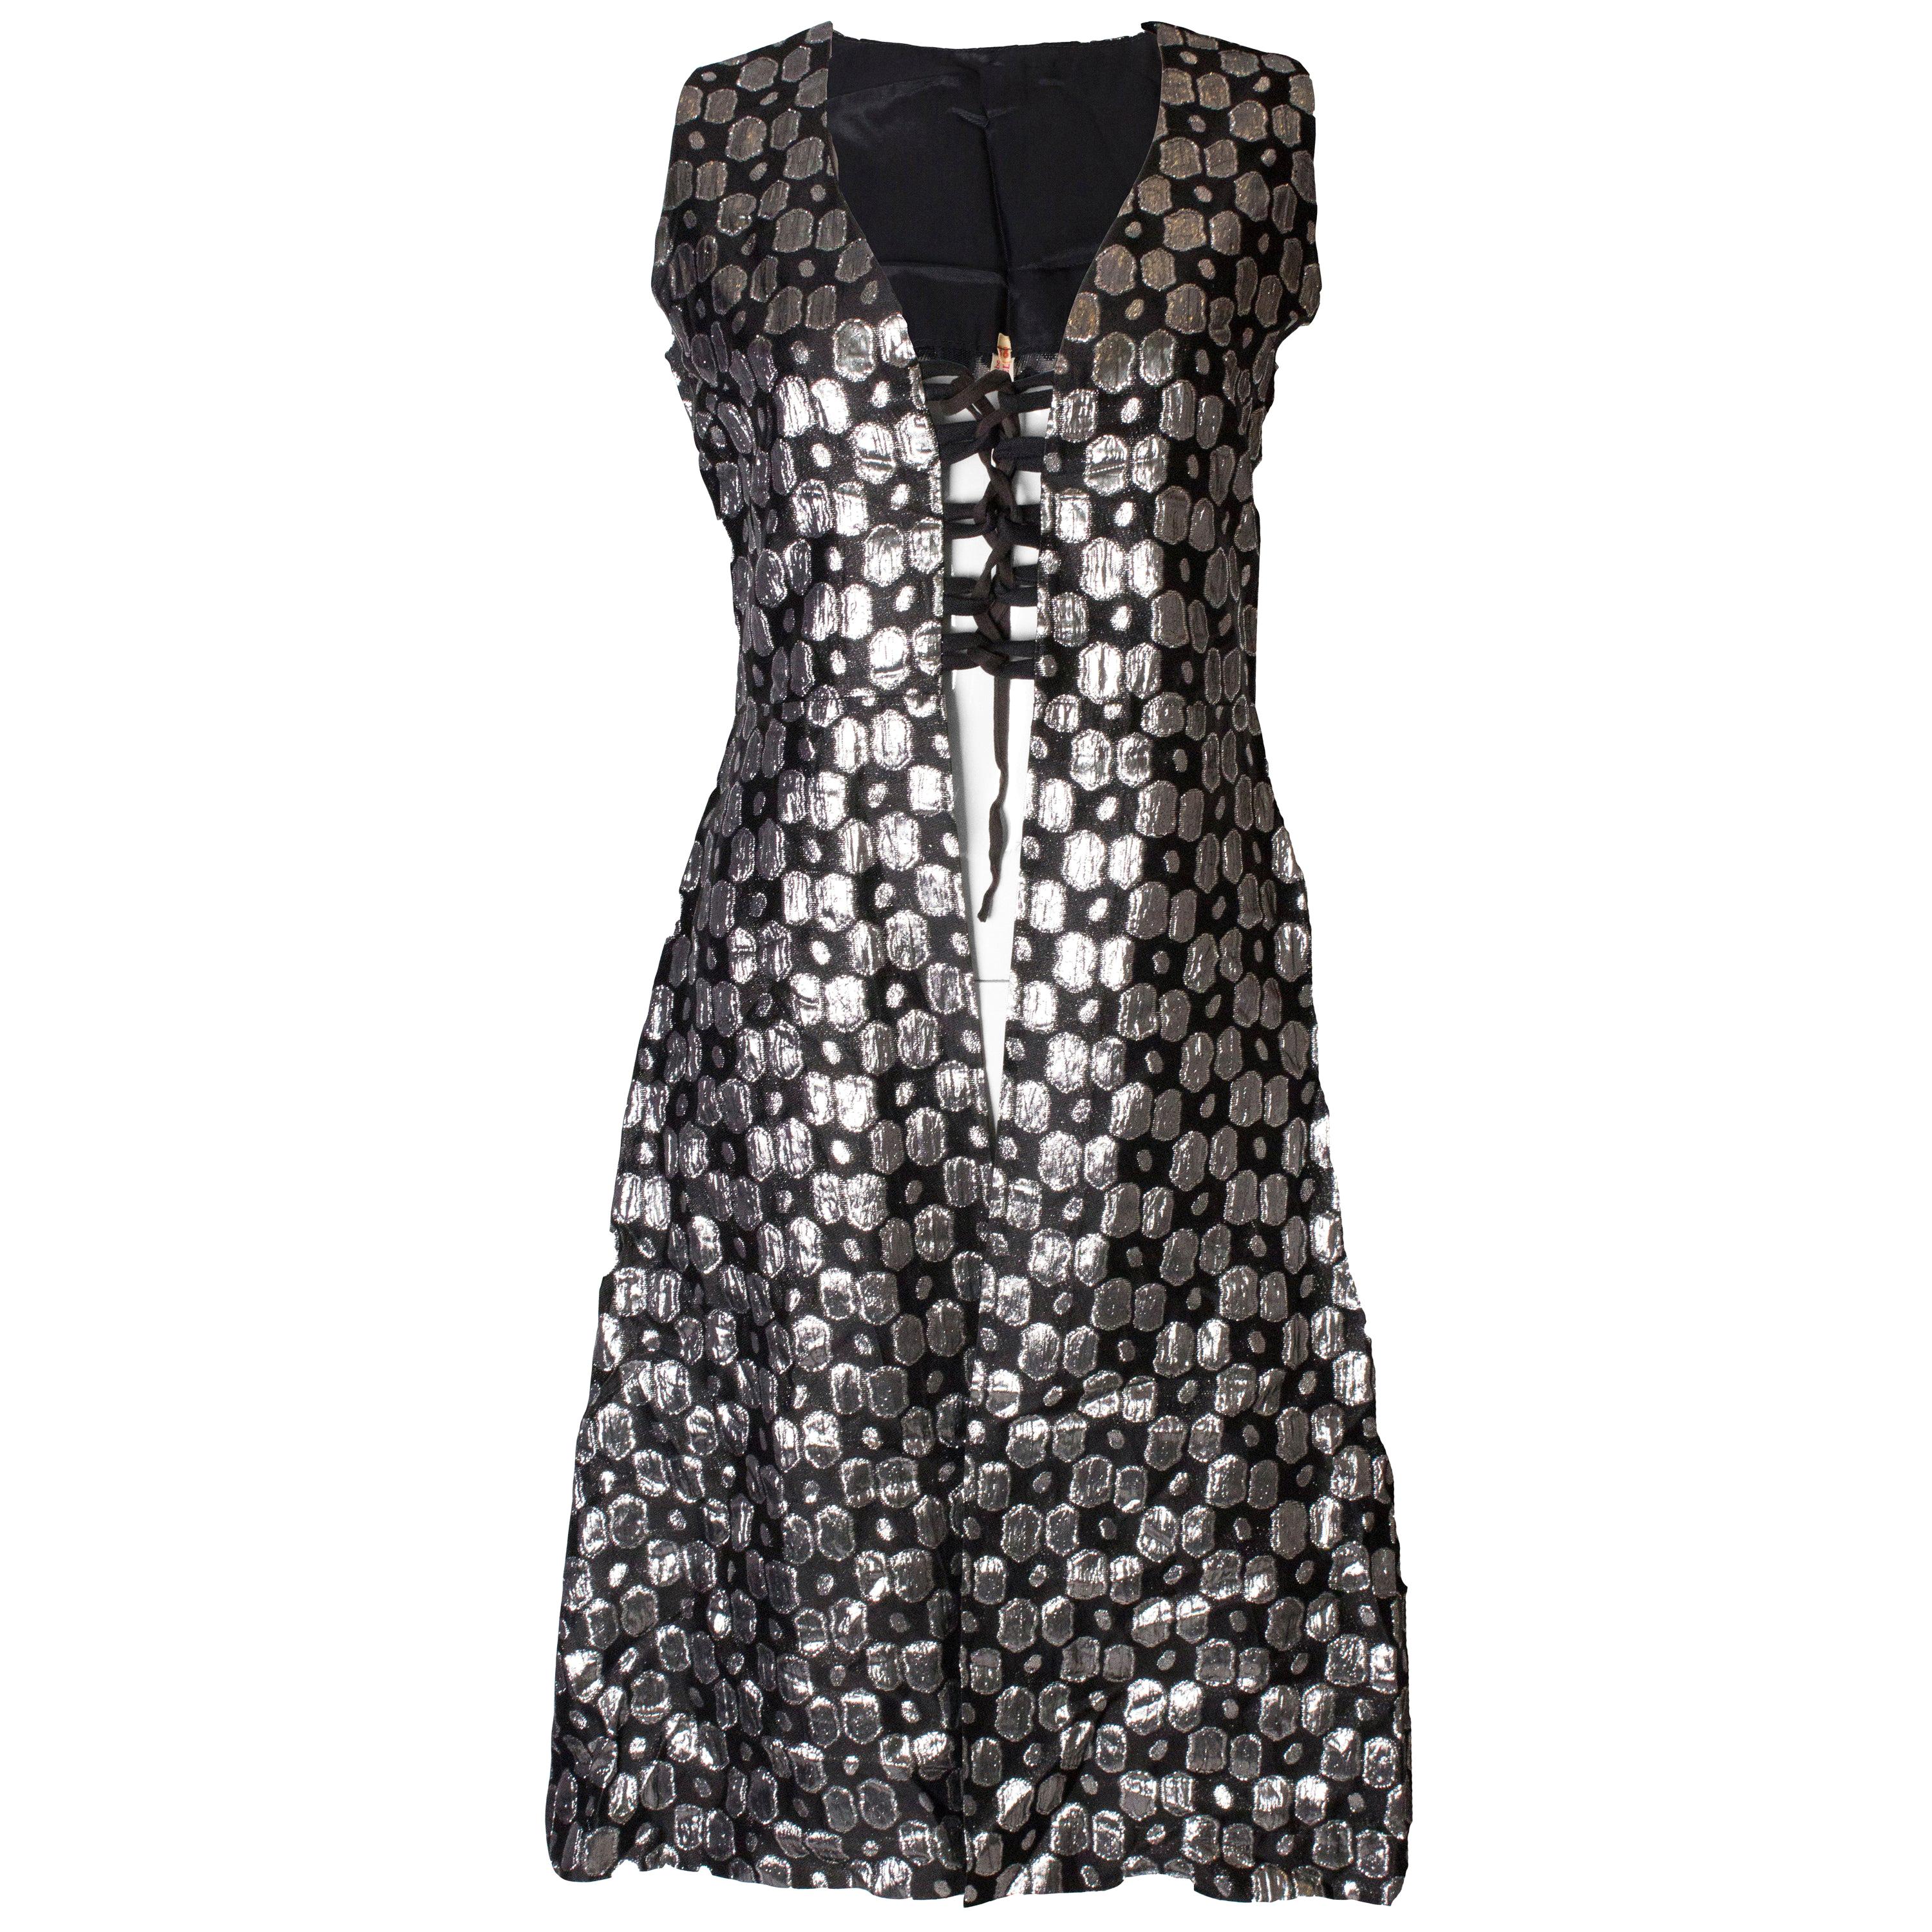 A Vintage 1960s Silver and Black Waistcoat /Mini Dress For Sale